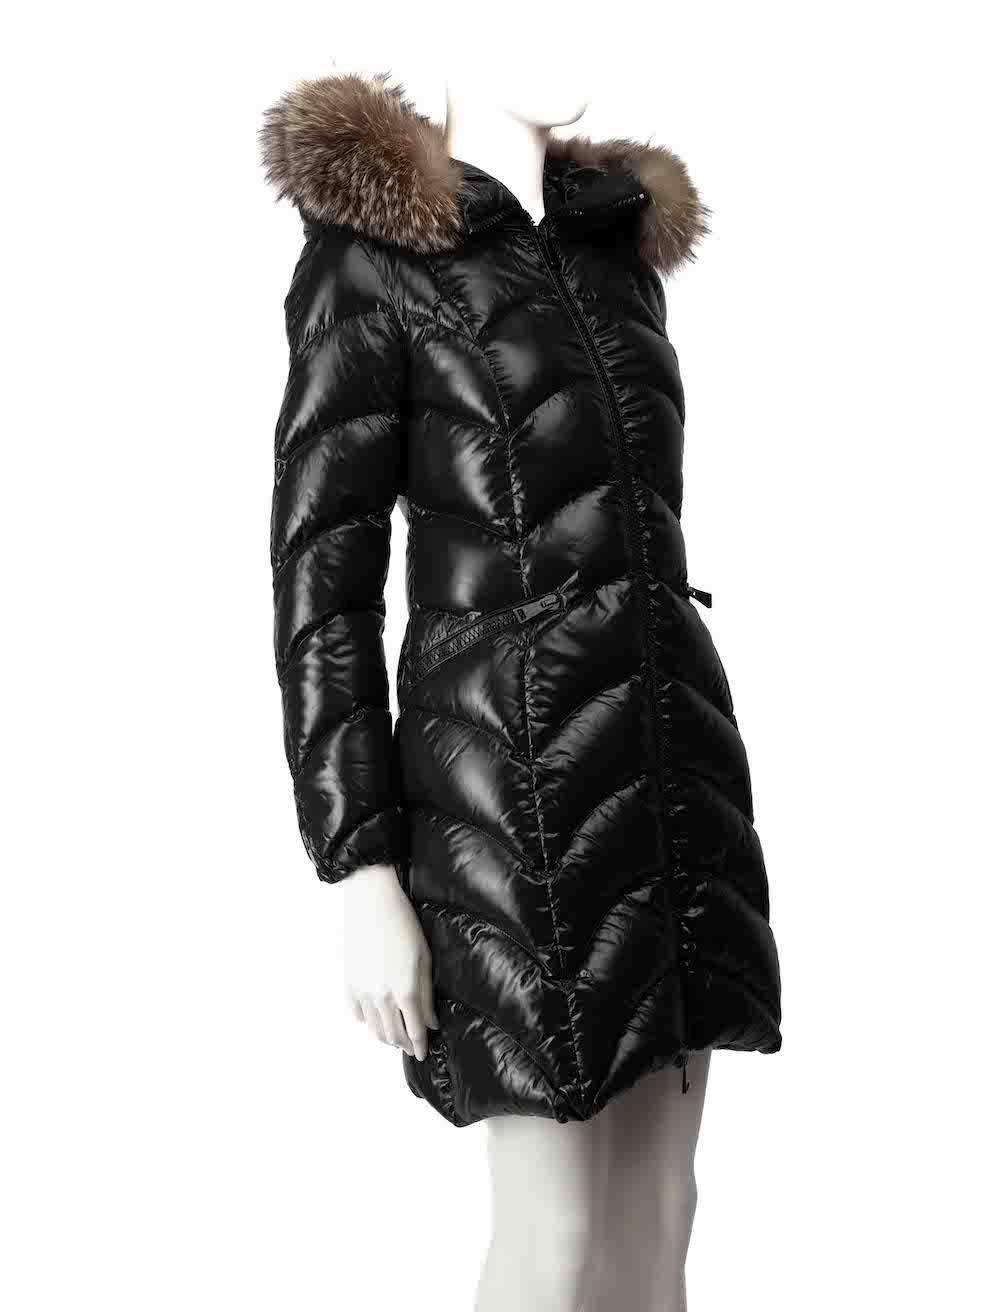 CONDITION is Very good. Minimal wear to coat is evident. Minimal wear to the neckline lining zip-edge with a small makeup mark on this used Moncler designer resale item.
 
Details
Black
Synthetic
Puffer coat
Mid length
Glossed accent
Chevron